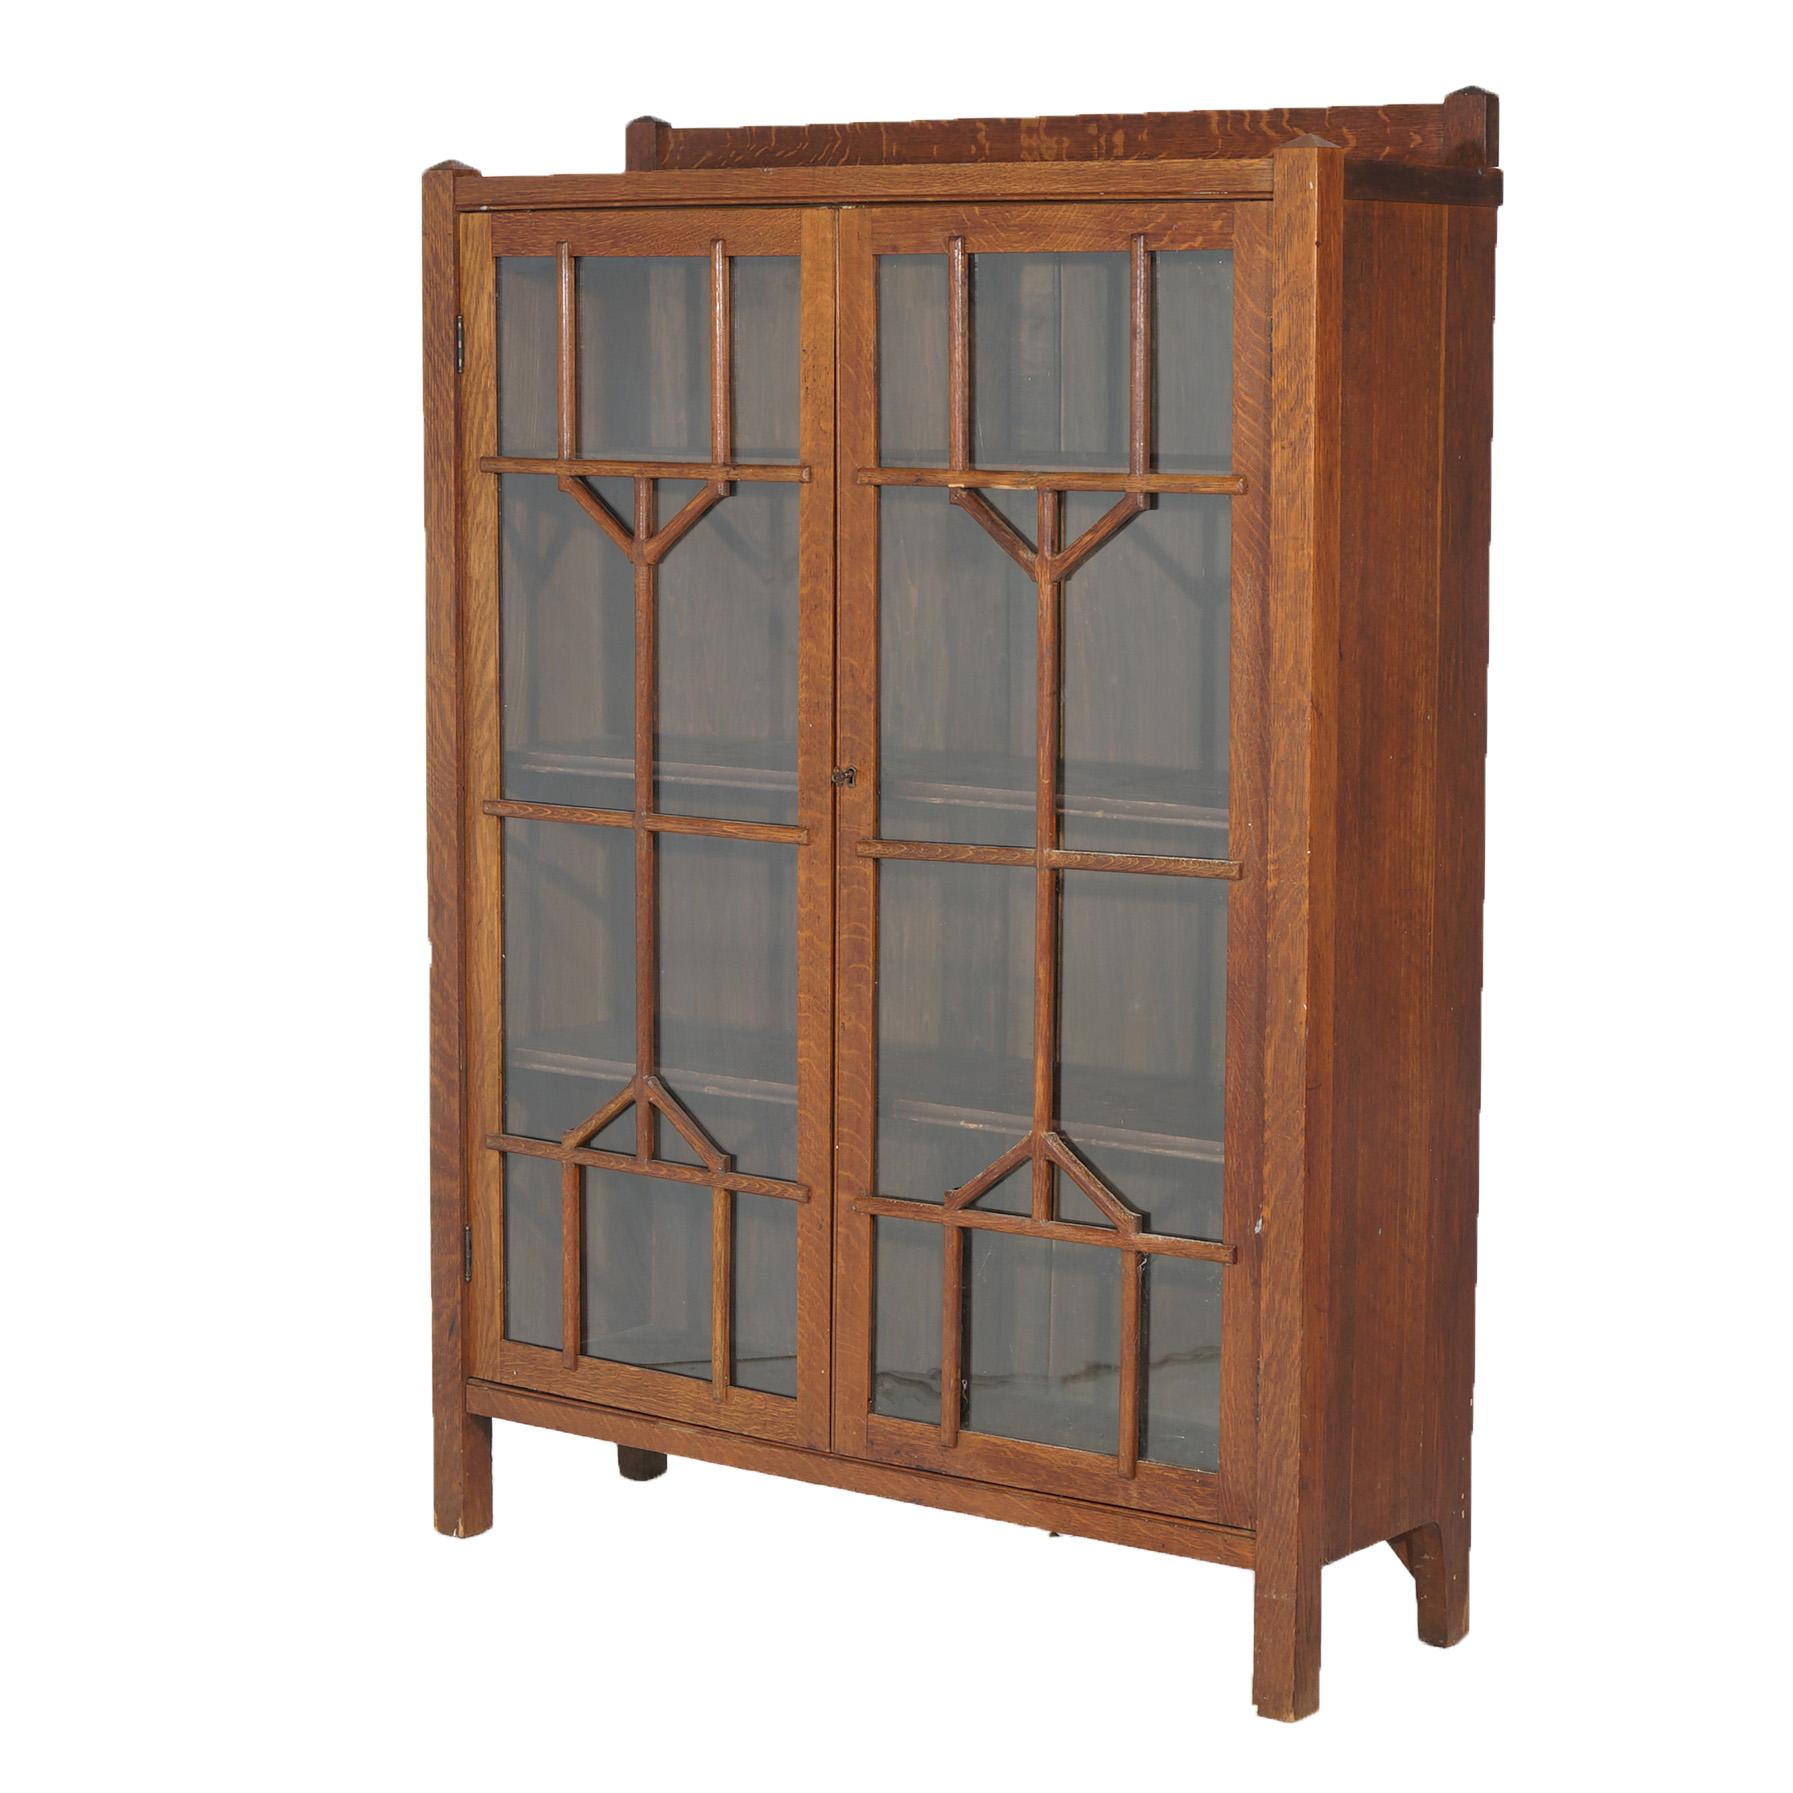 An antique Arts and Crafts Mission bookcase offers oak construction with double glass doors having cutout lattice overlay opening to shelved interior, raised on straight and square legs, c1910

Measures - 58.25